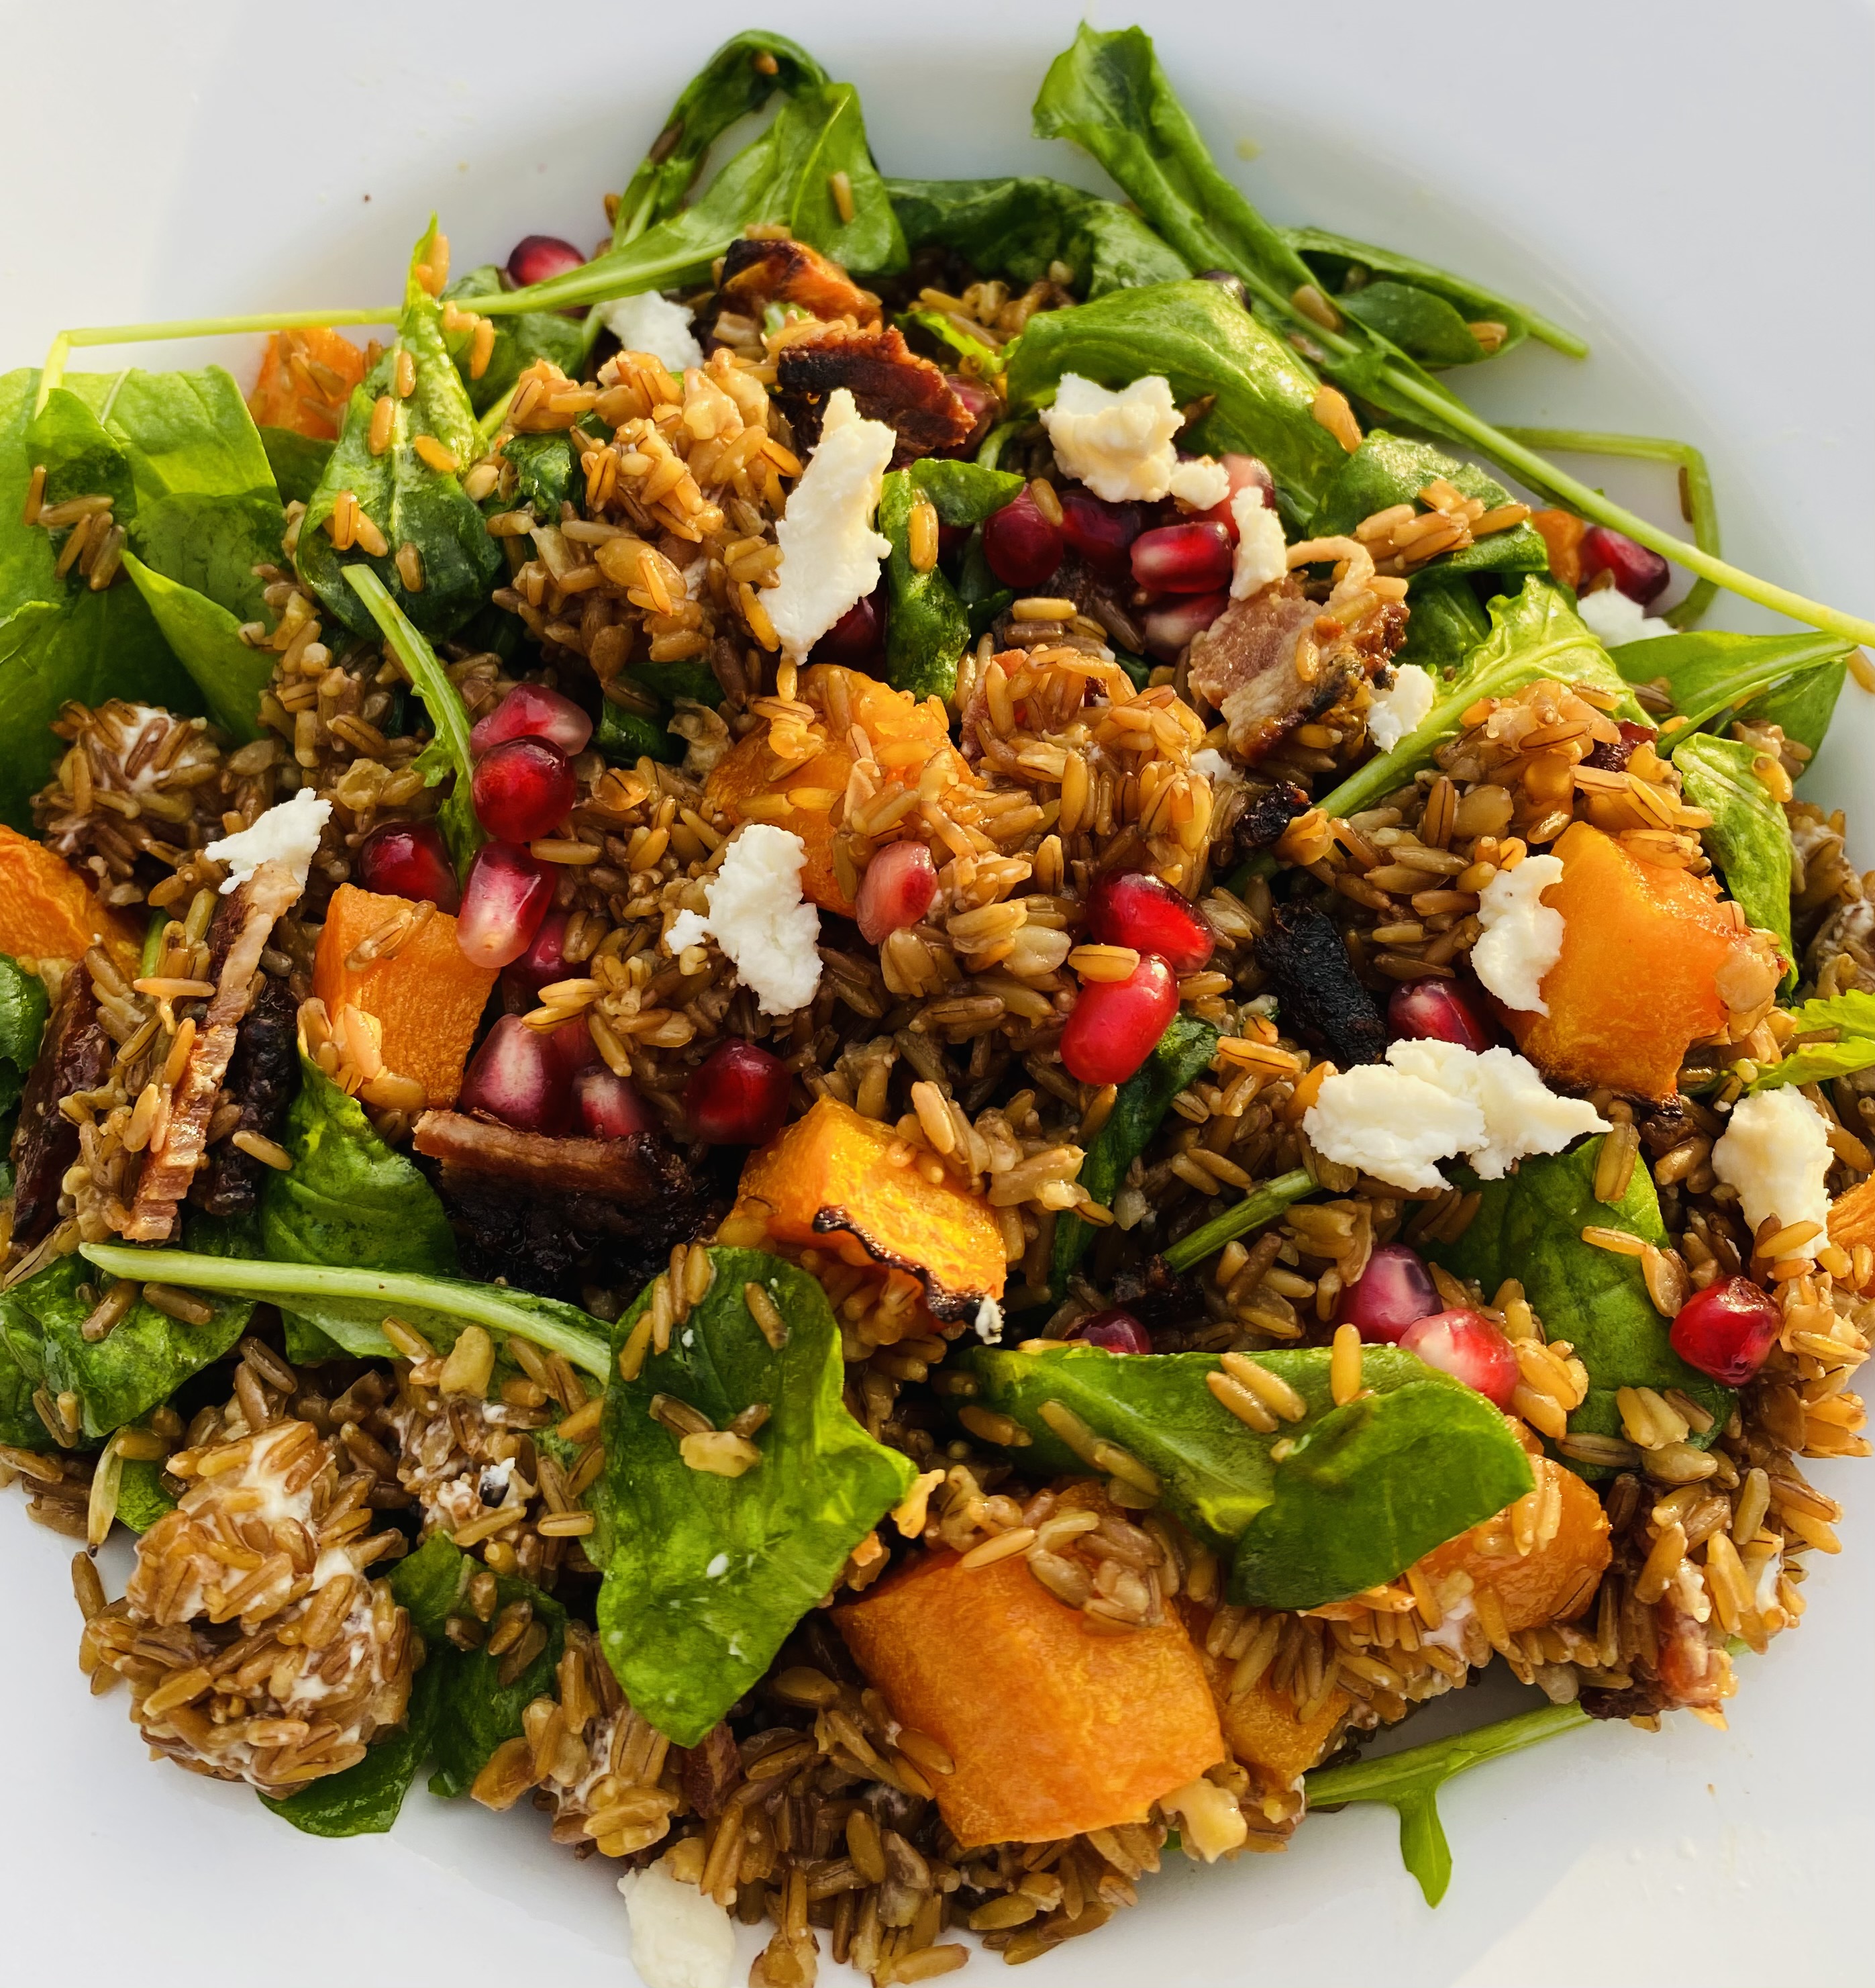 Kernza® whole grain salad with roasted butternut squash, bacon, crumbled goat cheese, fresh arugula and pomegranate seeds